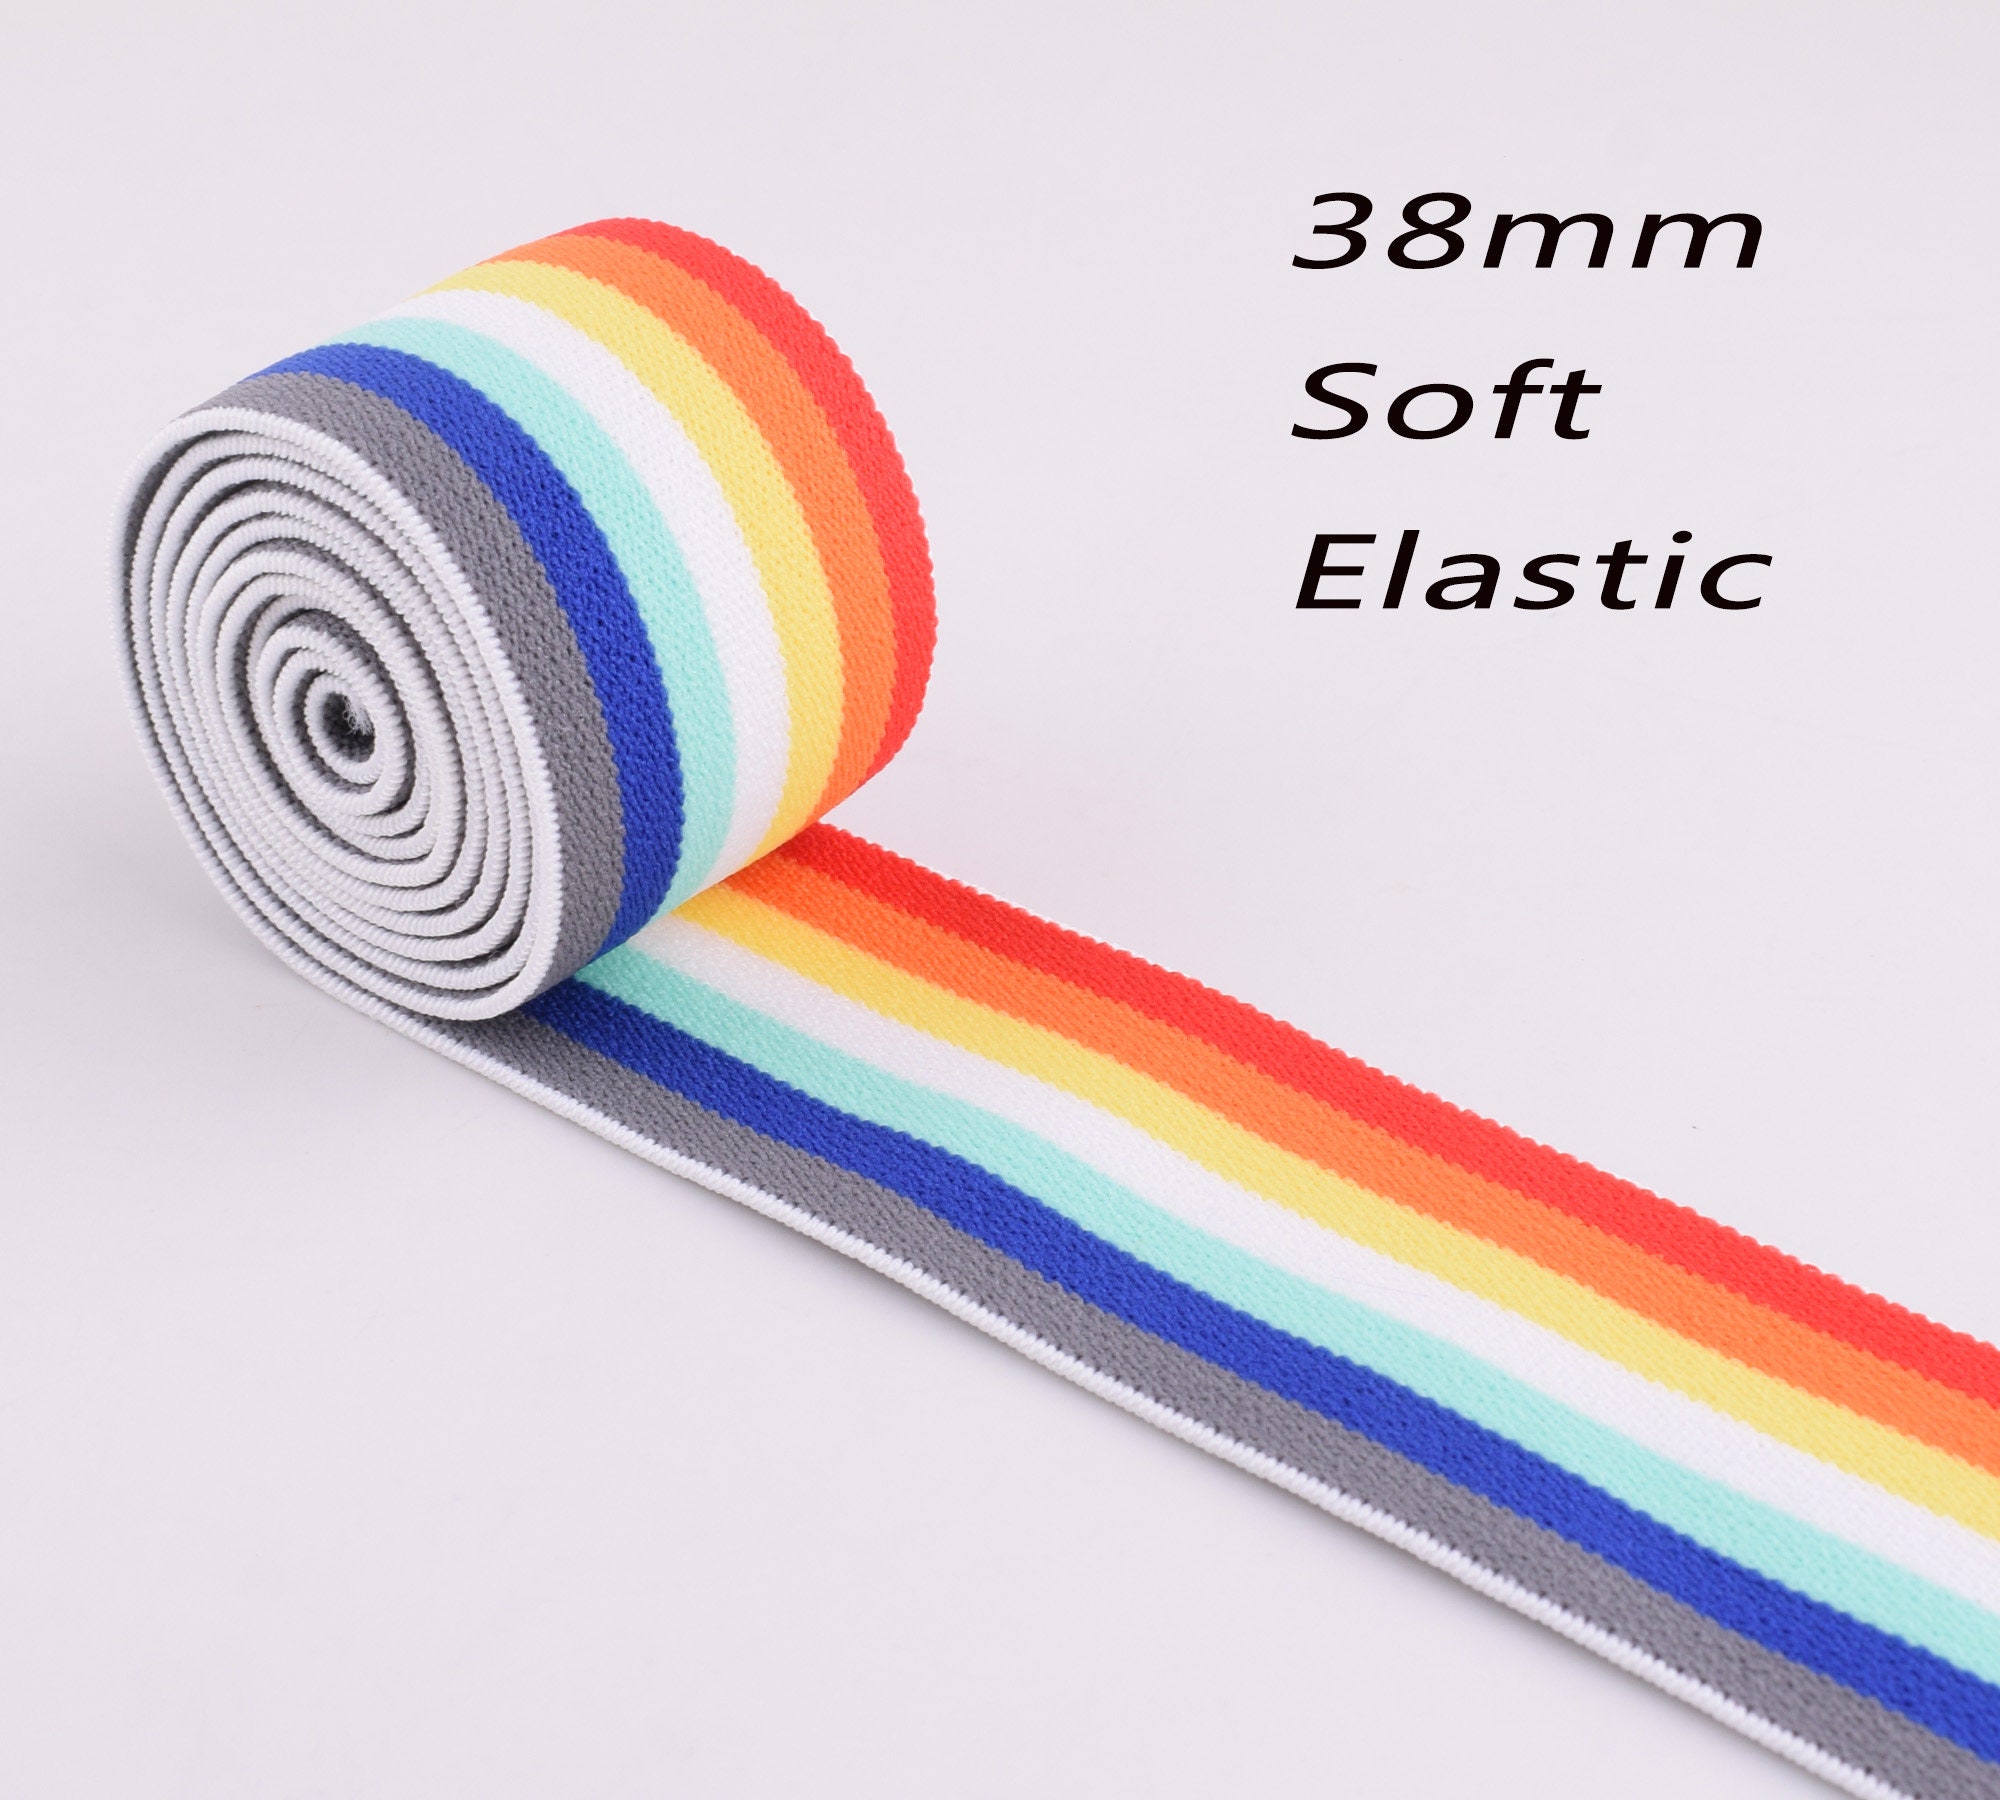 50Y 1.5mm Elastic Band, Elastic Tape, Stretch Elastic Band Sewing Elastic,  Colorful Band for Sewing Clothing Face Masks 